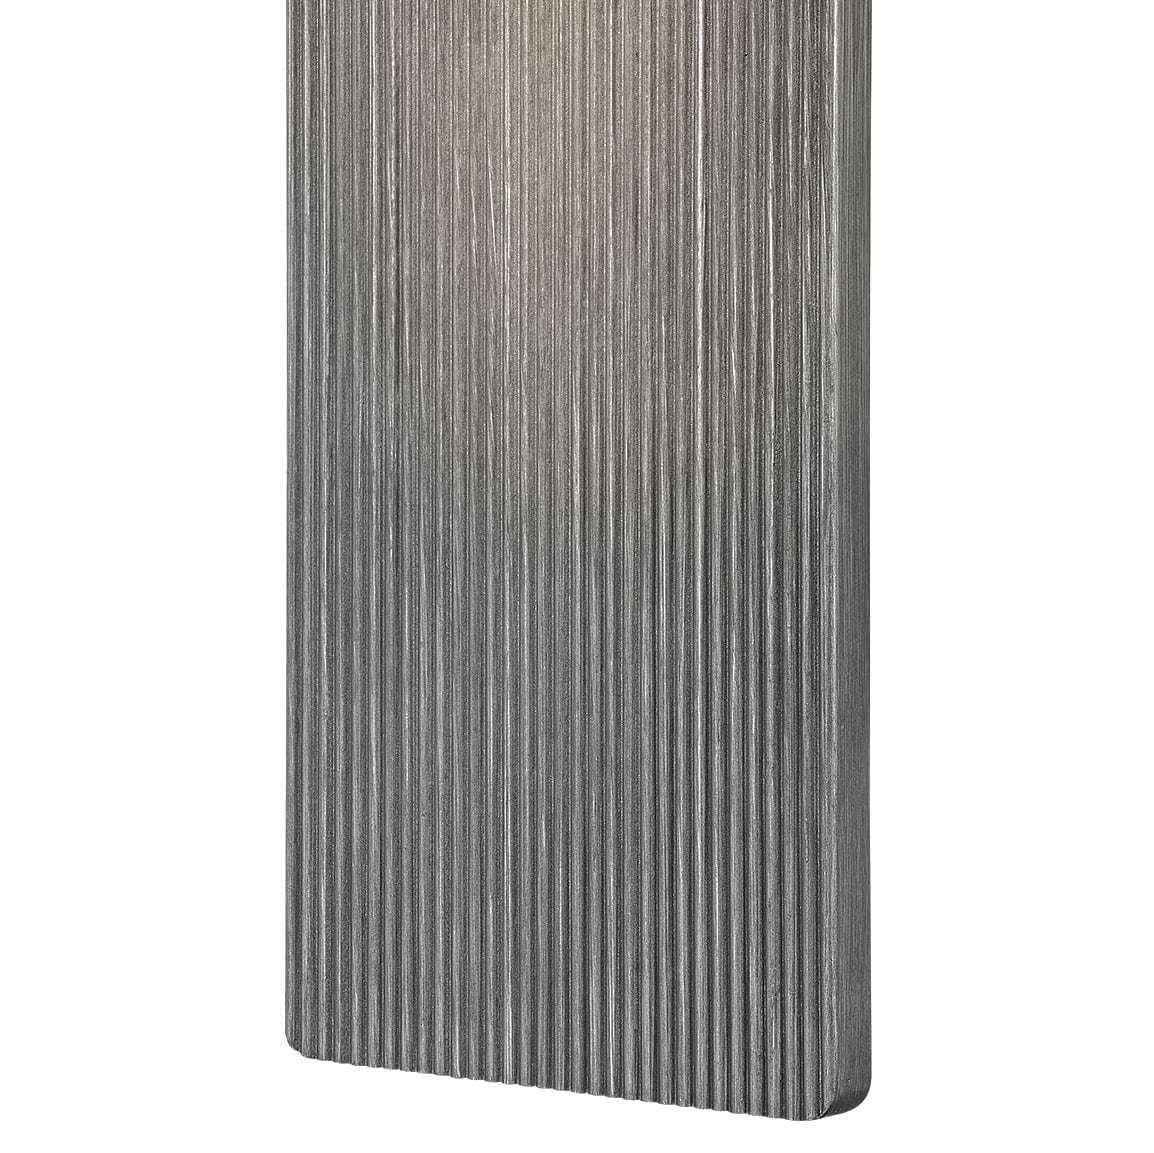 Troy Lighting Tempe Outdoor Wall Sconce Lighting